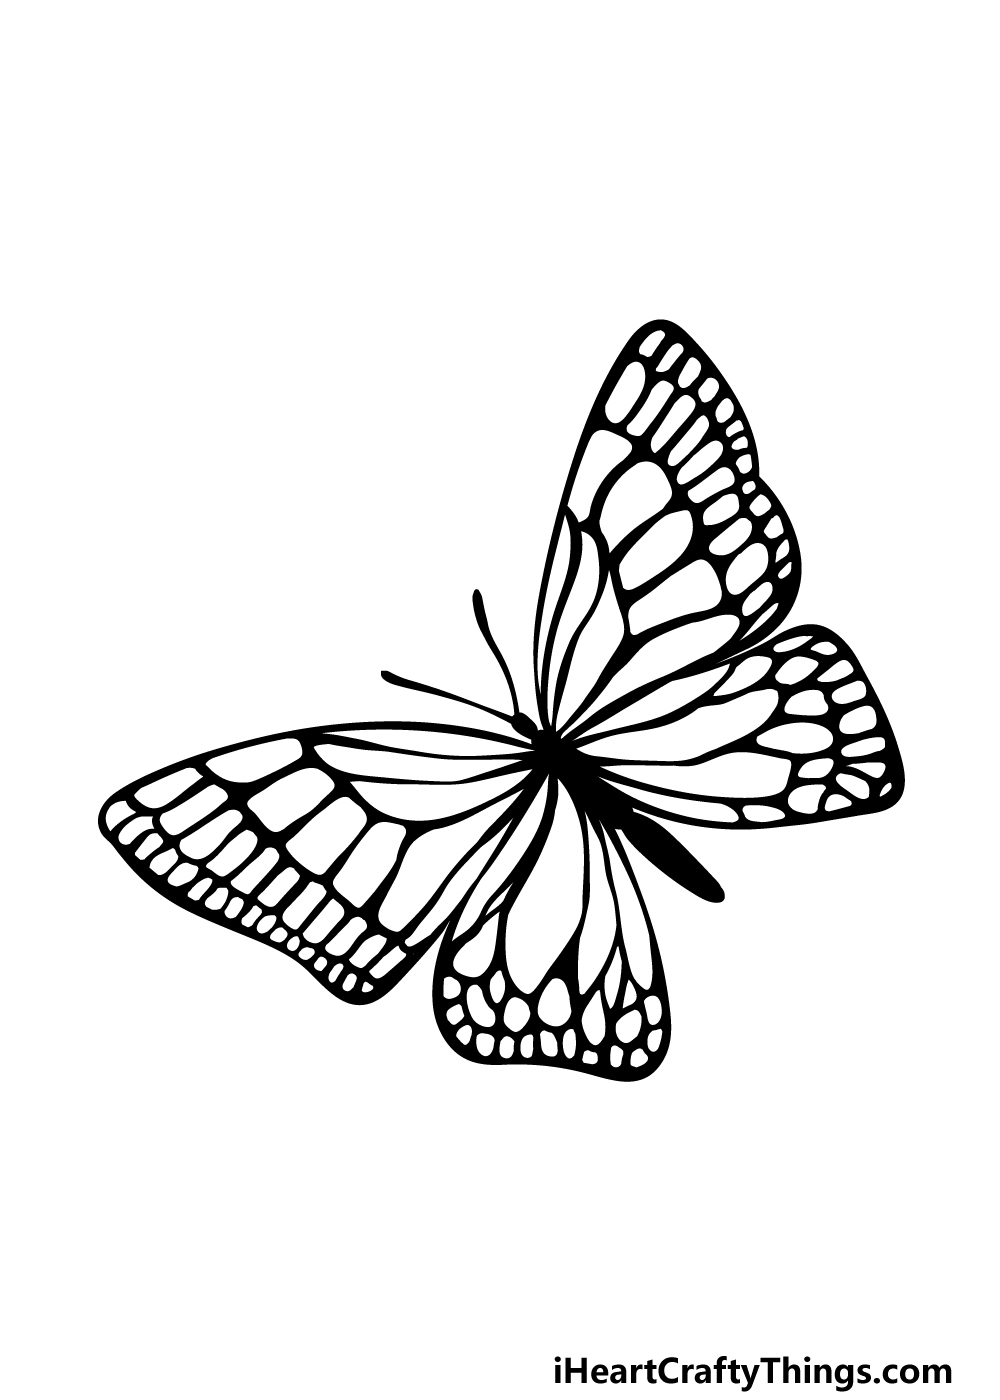 Line drawing of a blue butterfly on Craiyon-vinhomehanoi.com.vn